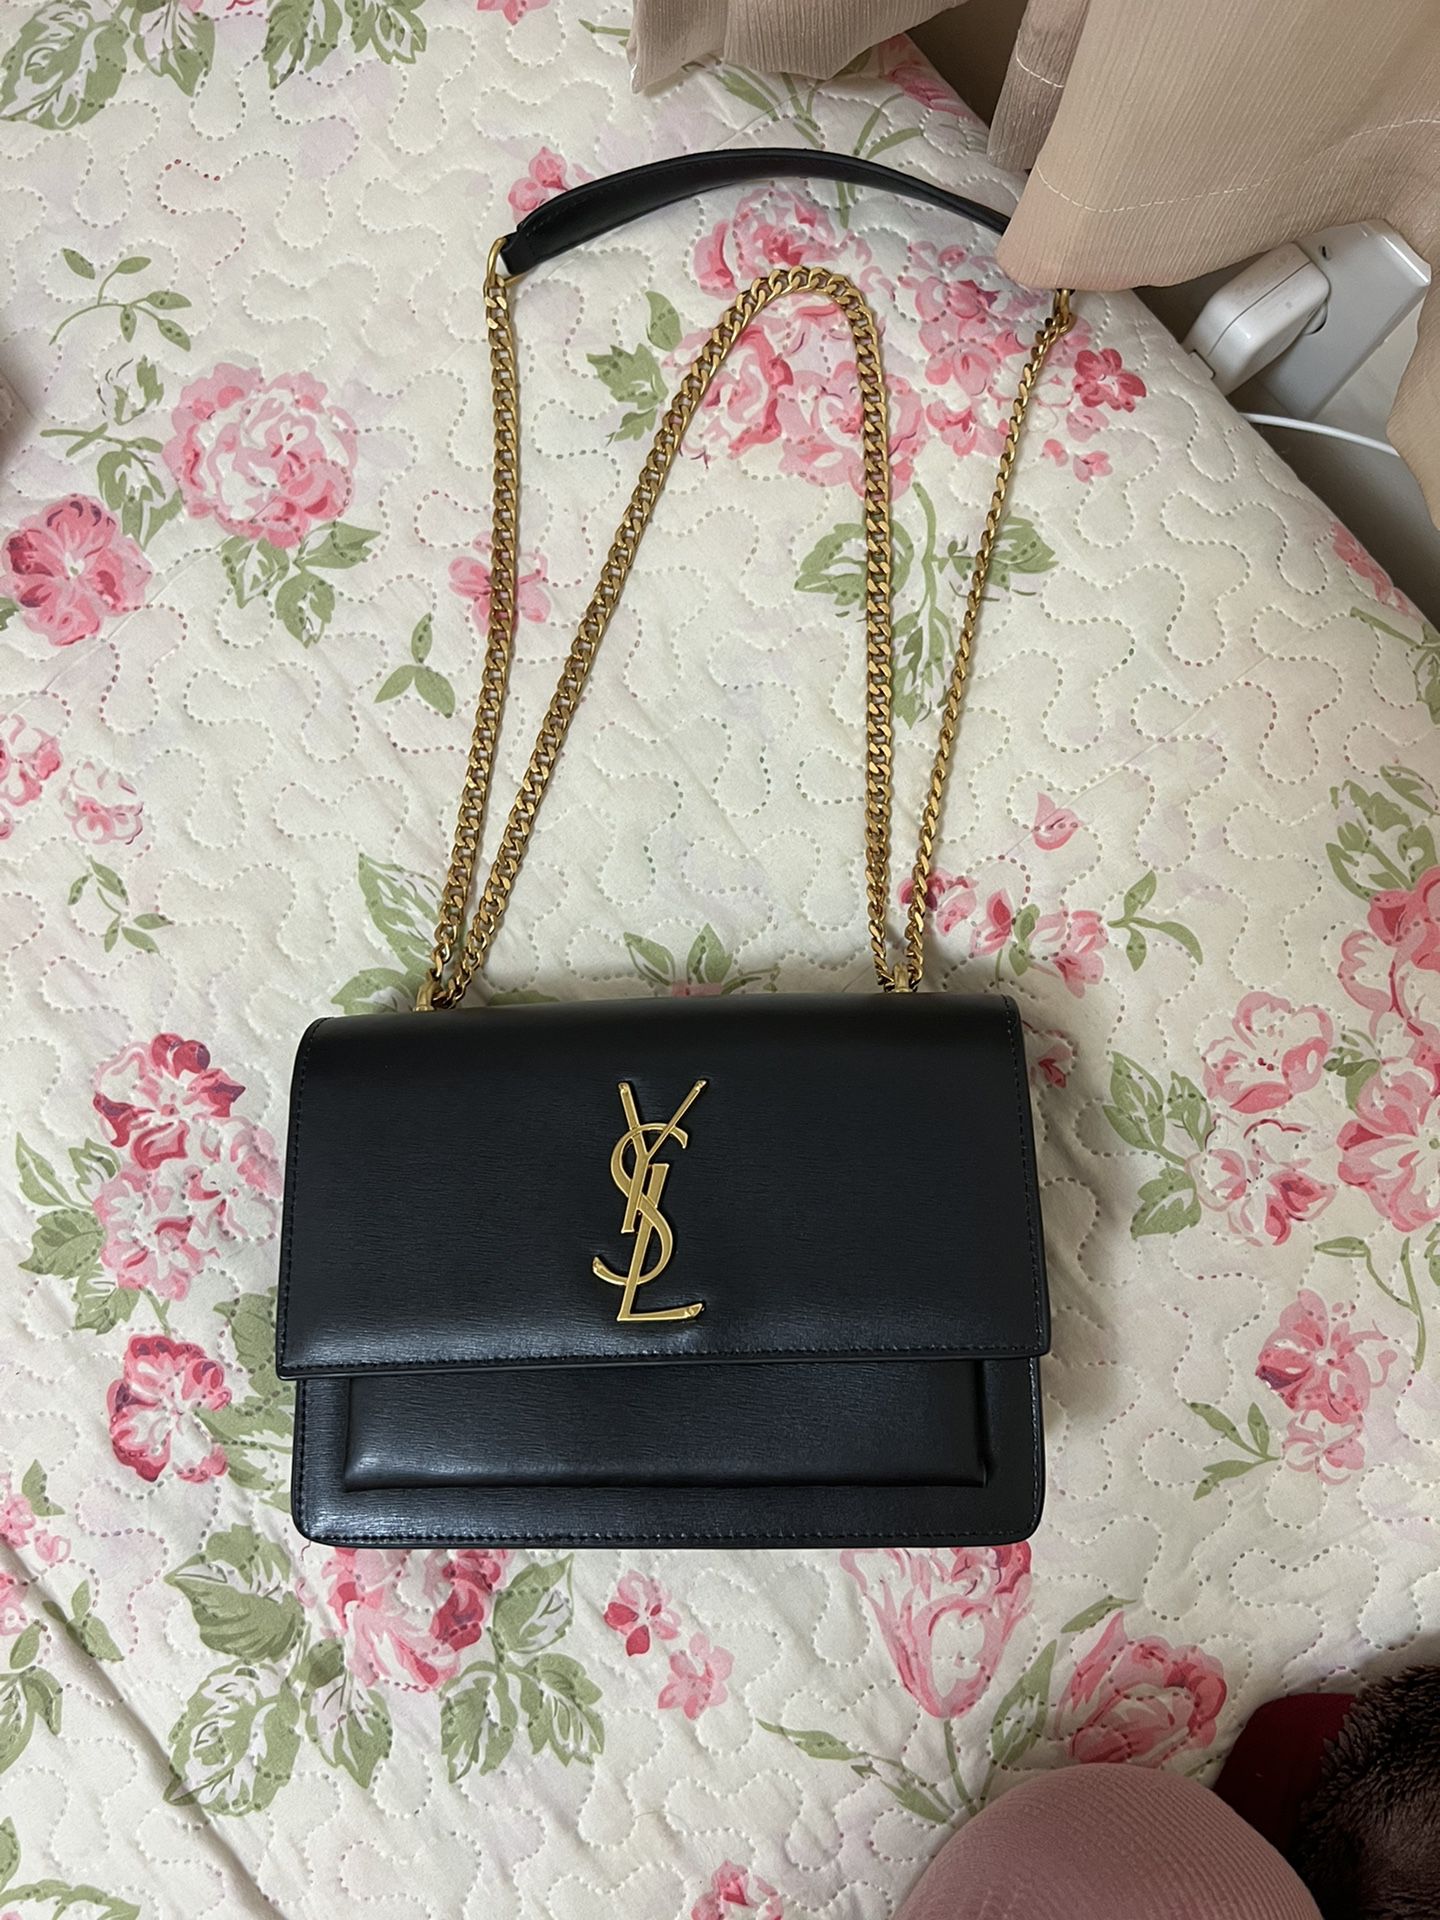 YSL SUNSET MEDIUM CHAIN BAG IN SMOOTH LEATHER for Sale in Brooklyn, NY -  OfferUp